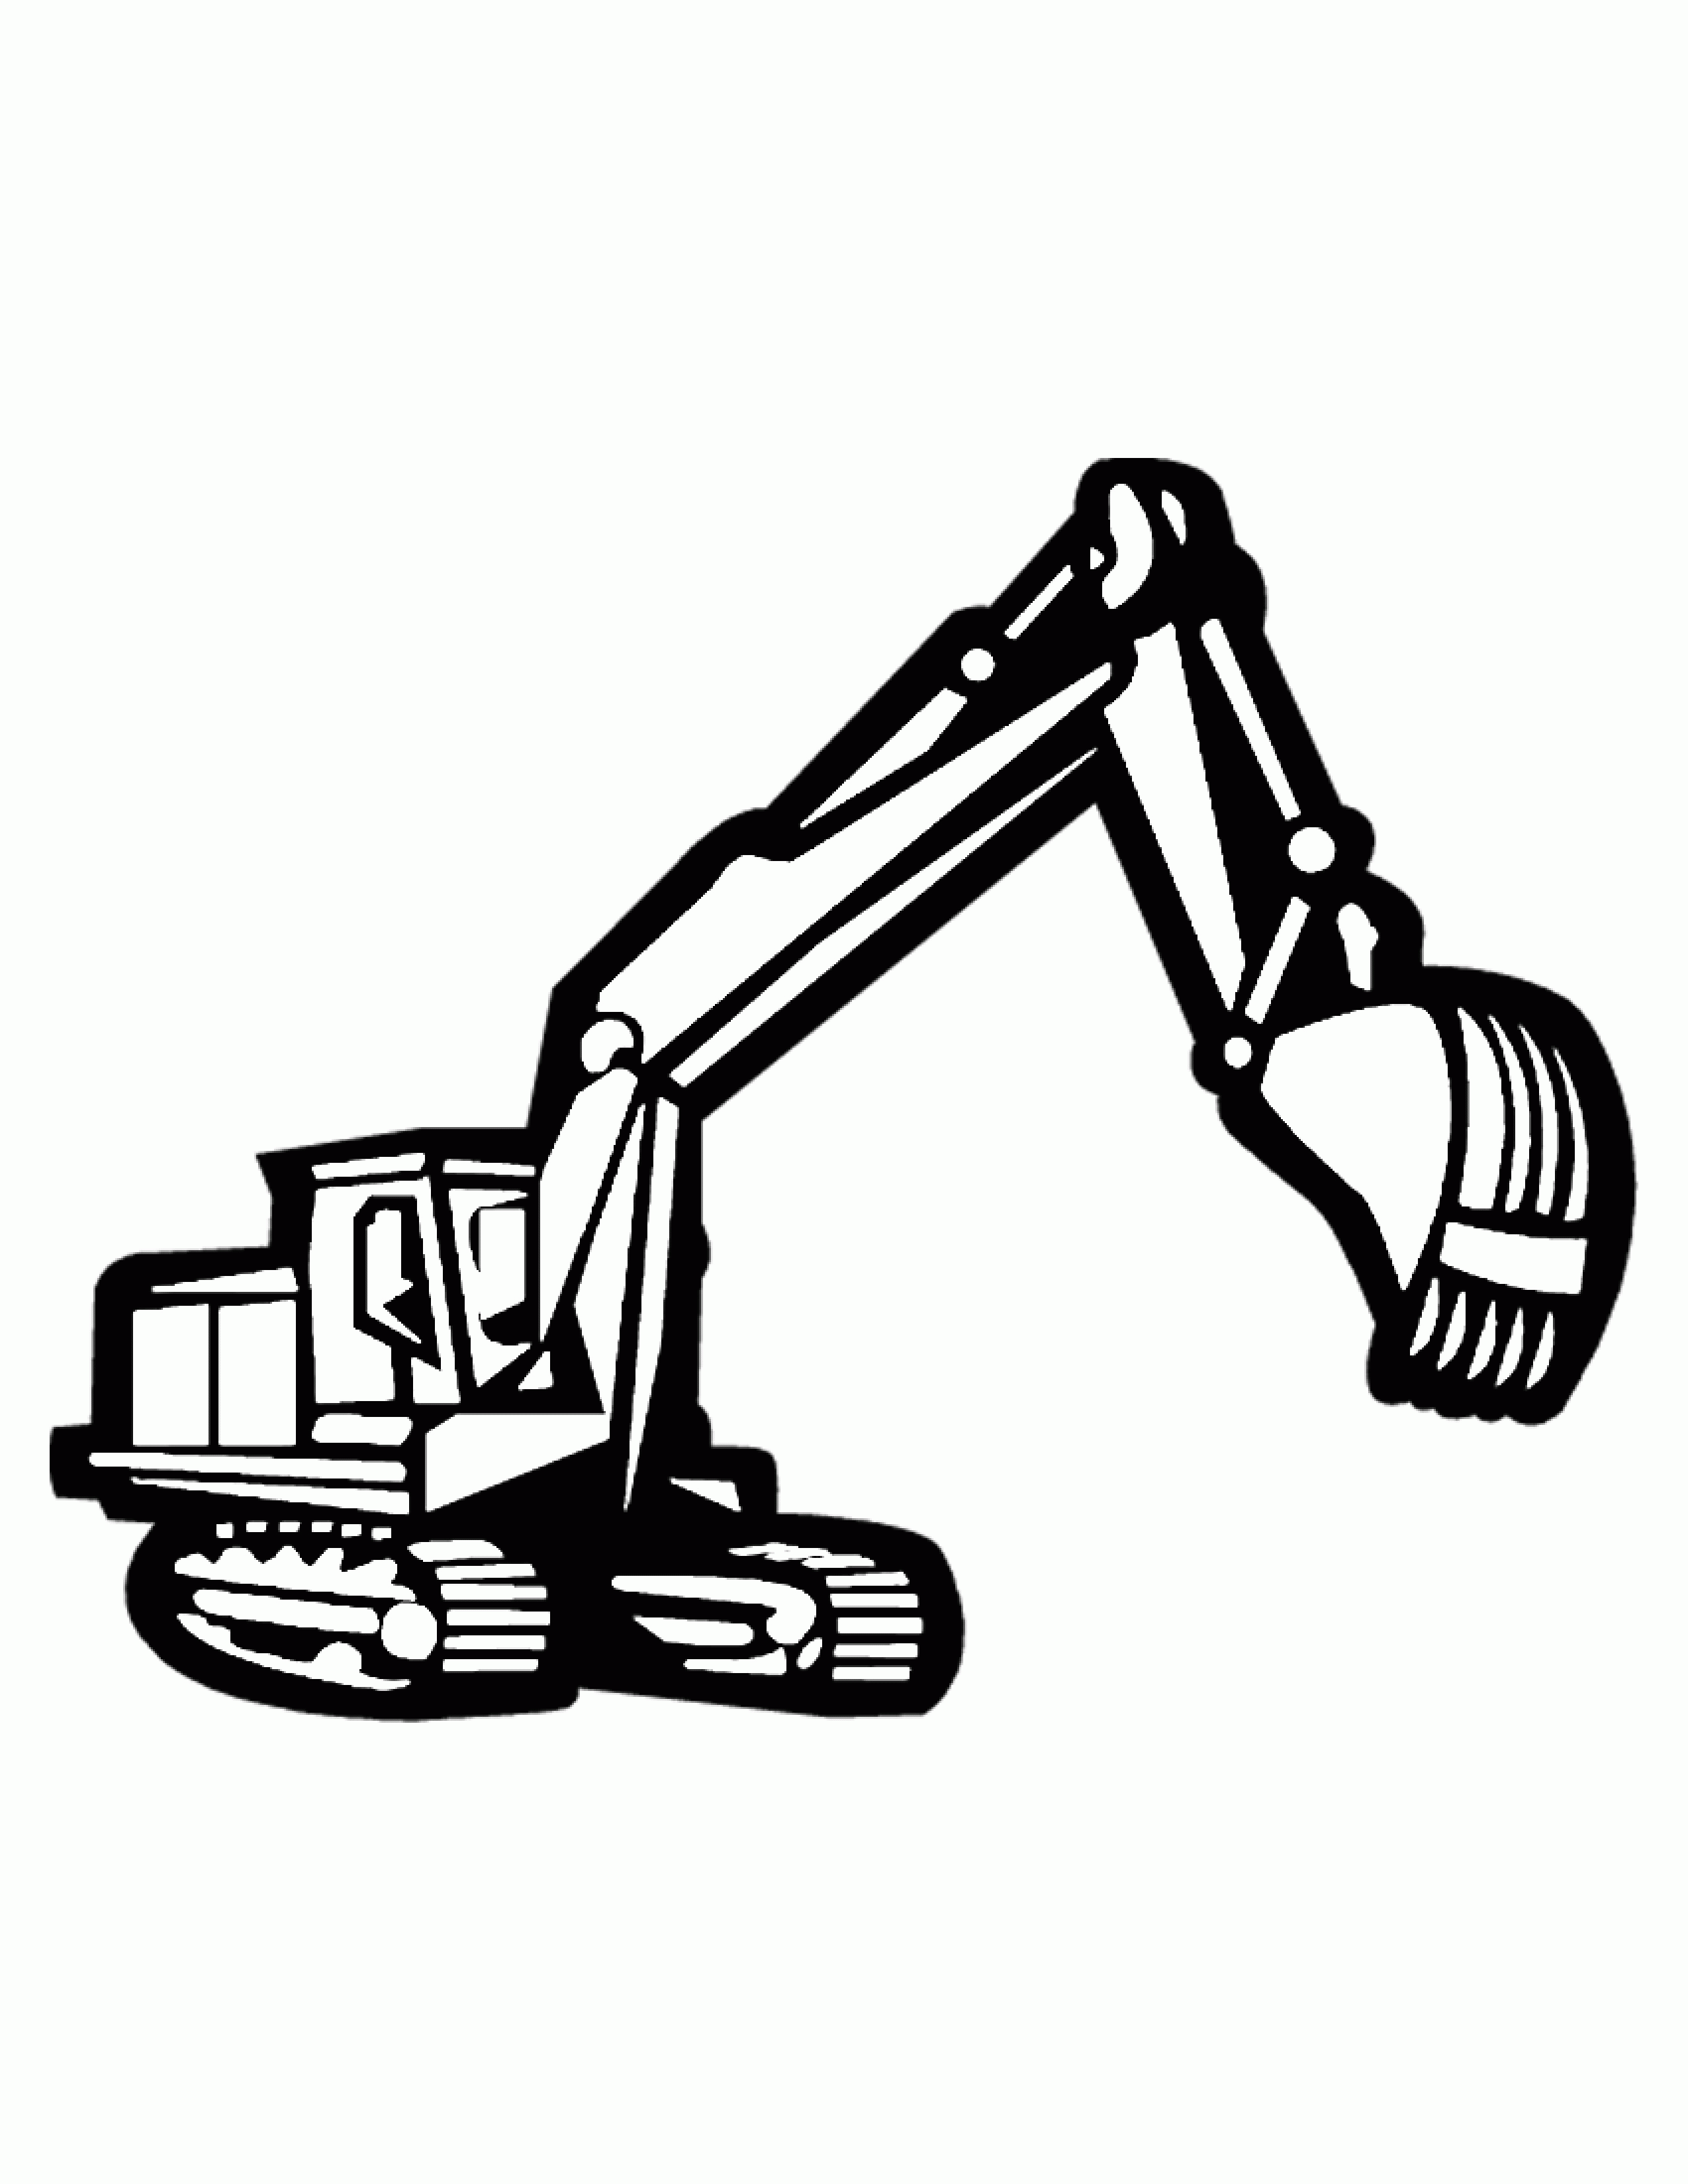 construction-vehicles-coloring-pages